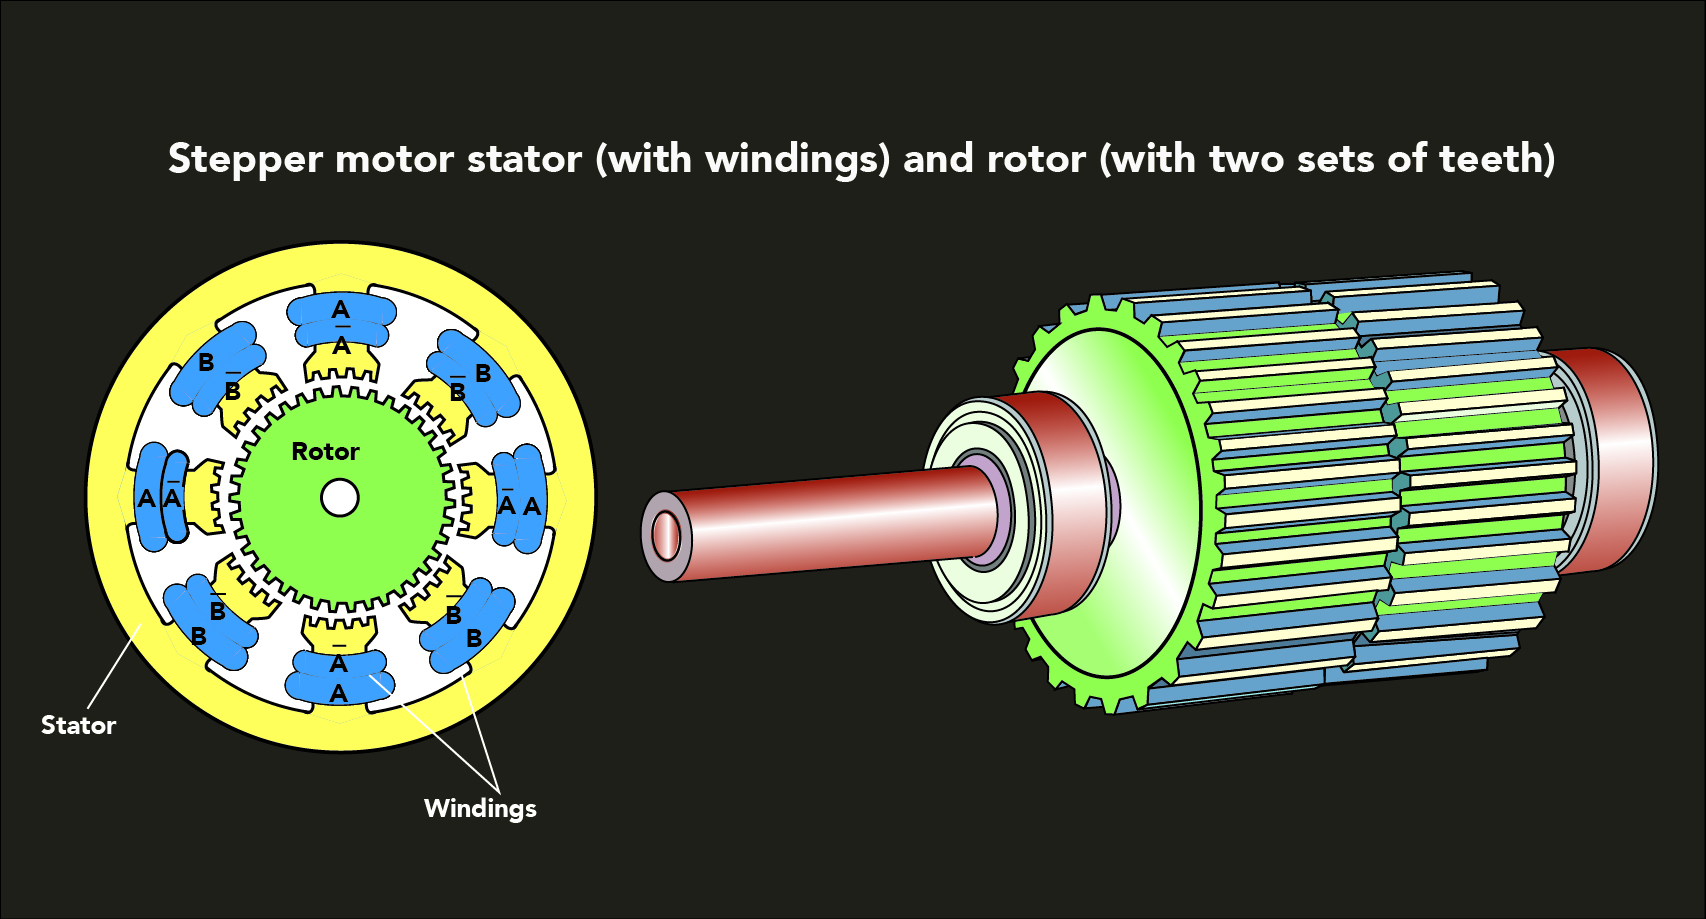 Shown here are the rotor and stator of a hybrid stepper motor. Two soft iron cups sport teeth to guide the flux from a permanent magnet to the rotor-stator air gap.